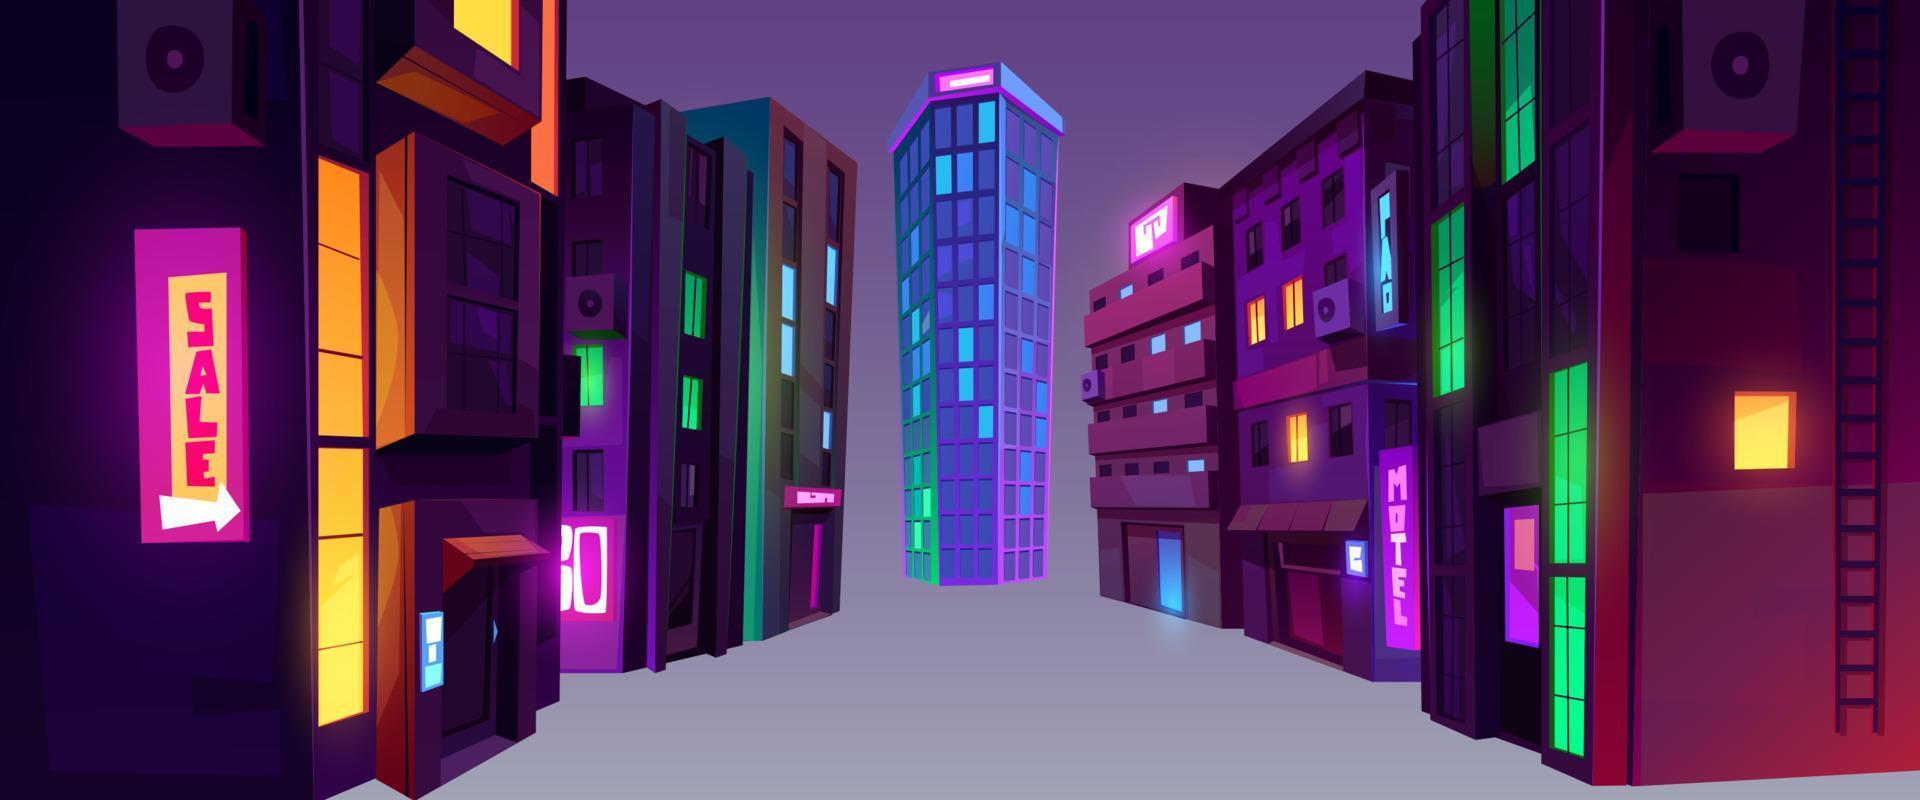 City buildings at night in perspective view vector